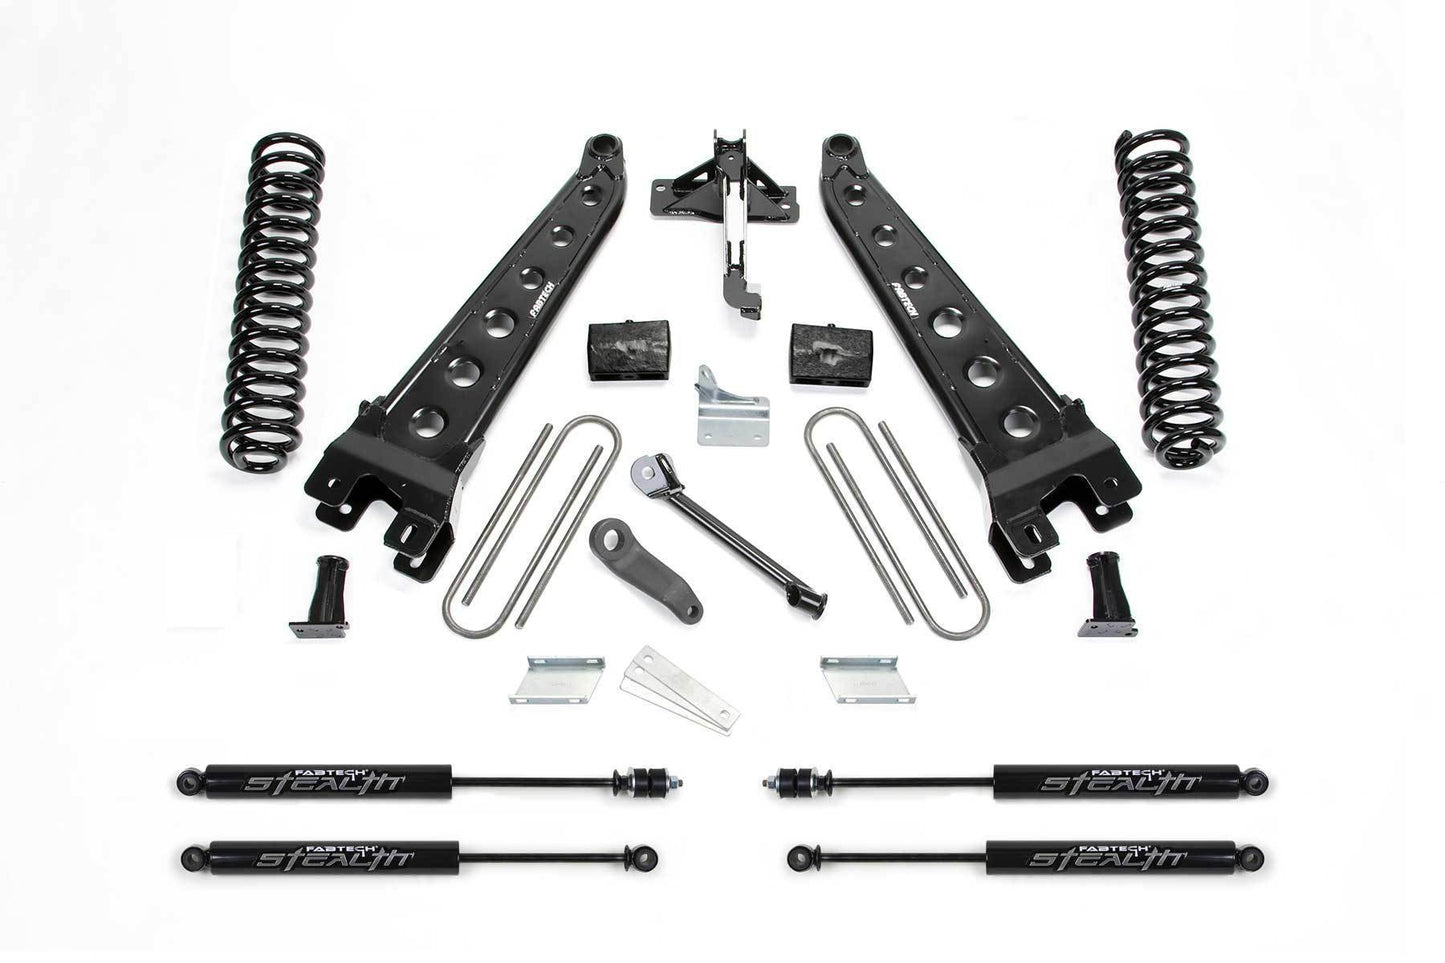 6" RAD ARM SYS W/COILS & STEALTH 2011-13 FORD F450/550 4WD 10 LUG - 6" RAD ARM SYS W/COI - Fabtech - Texas Complete Truck Center